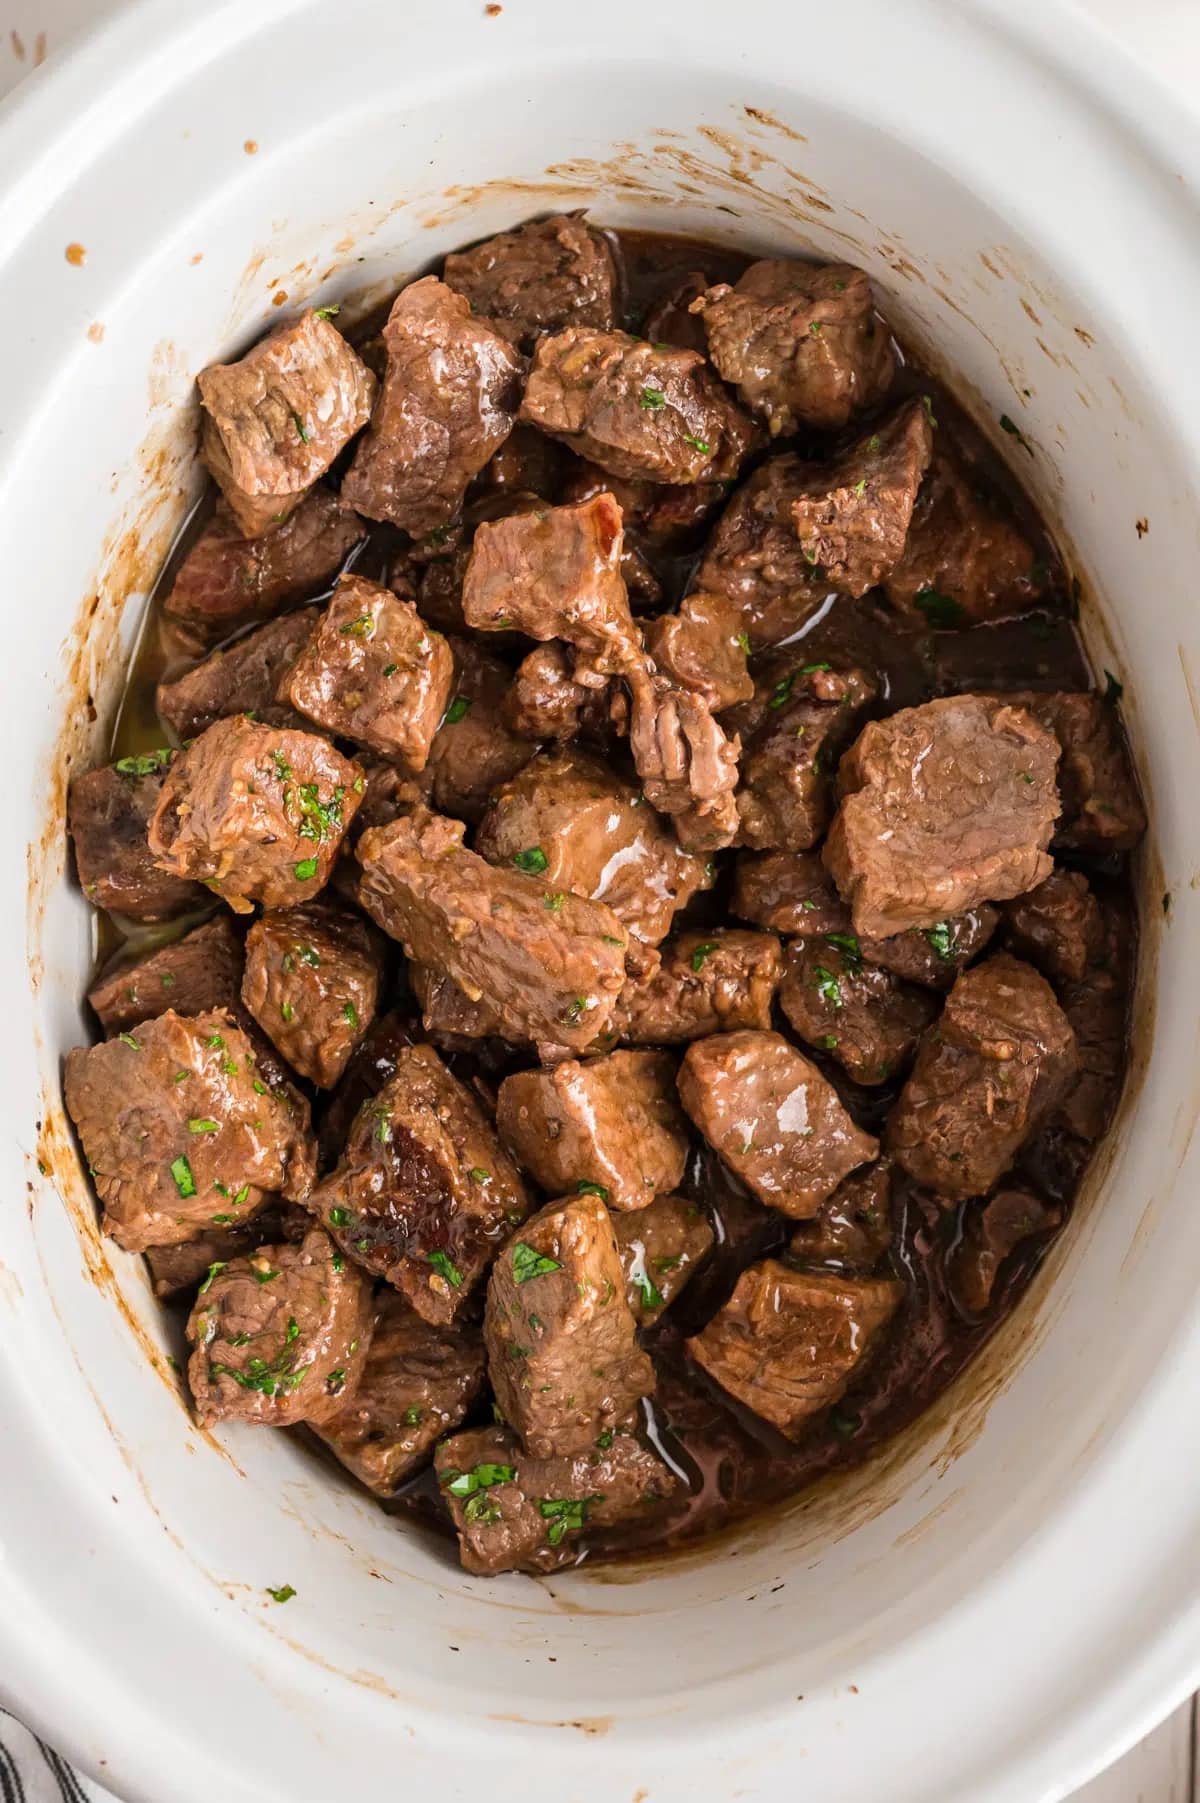 Steak bites in a slow cooker garnished with parsley.